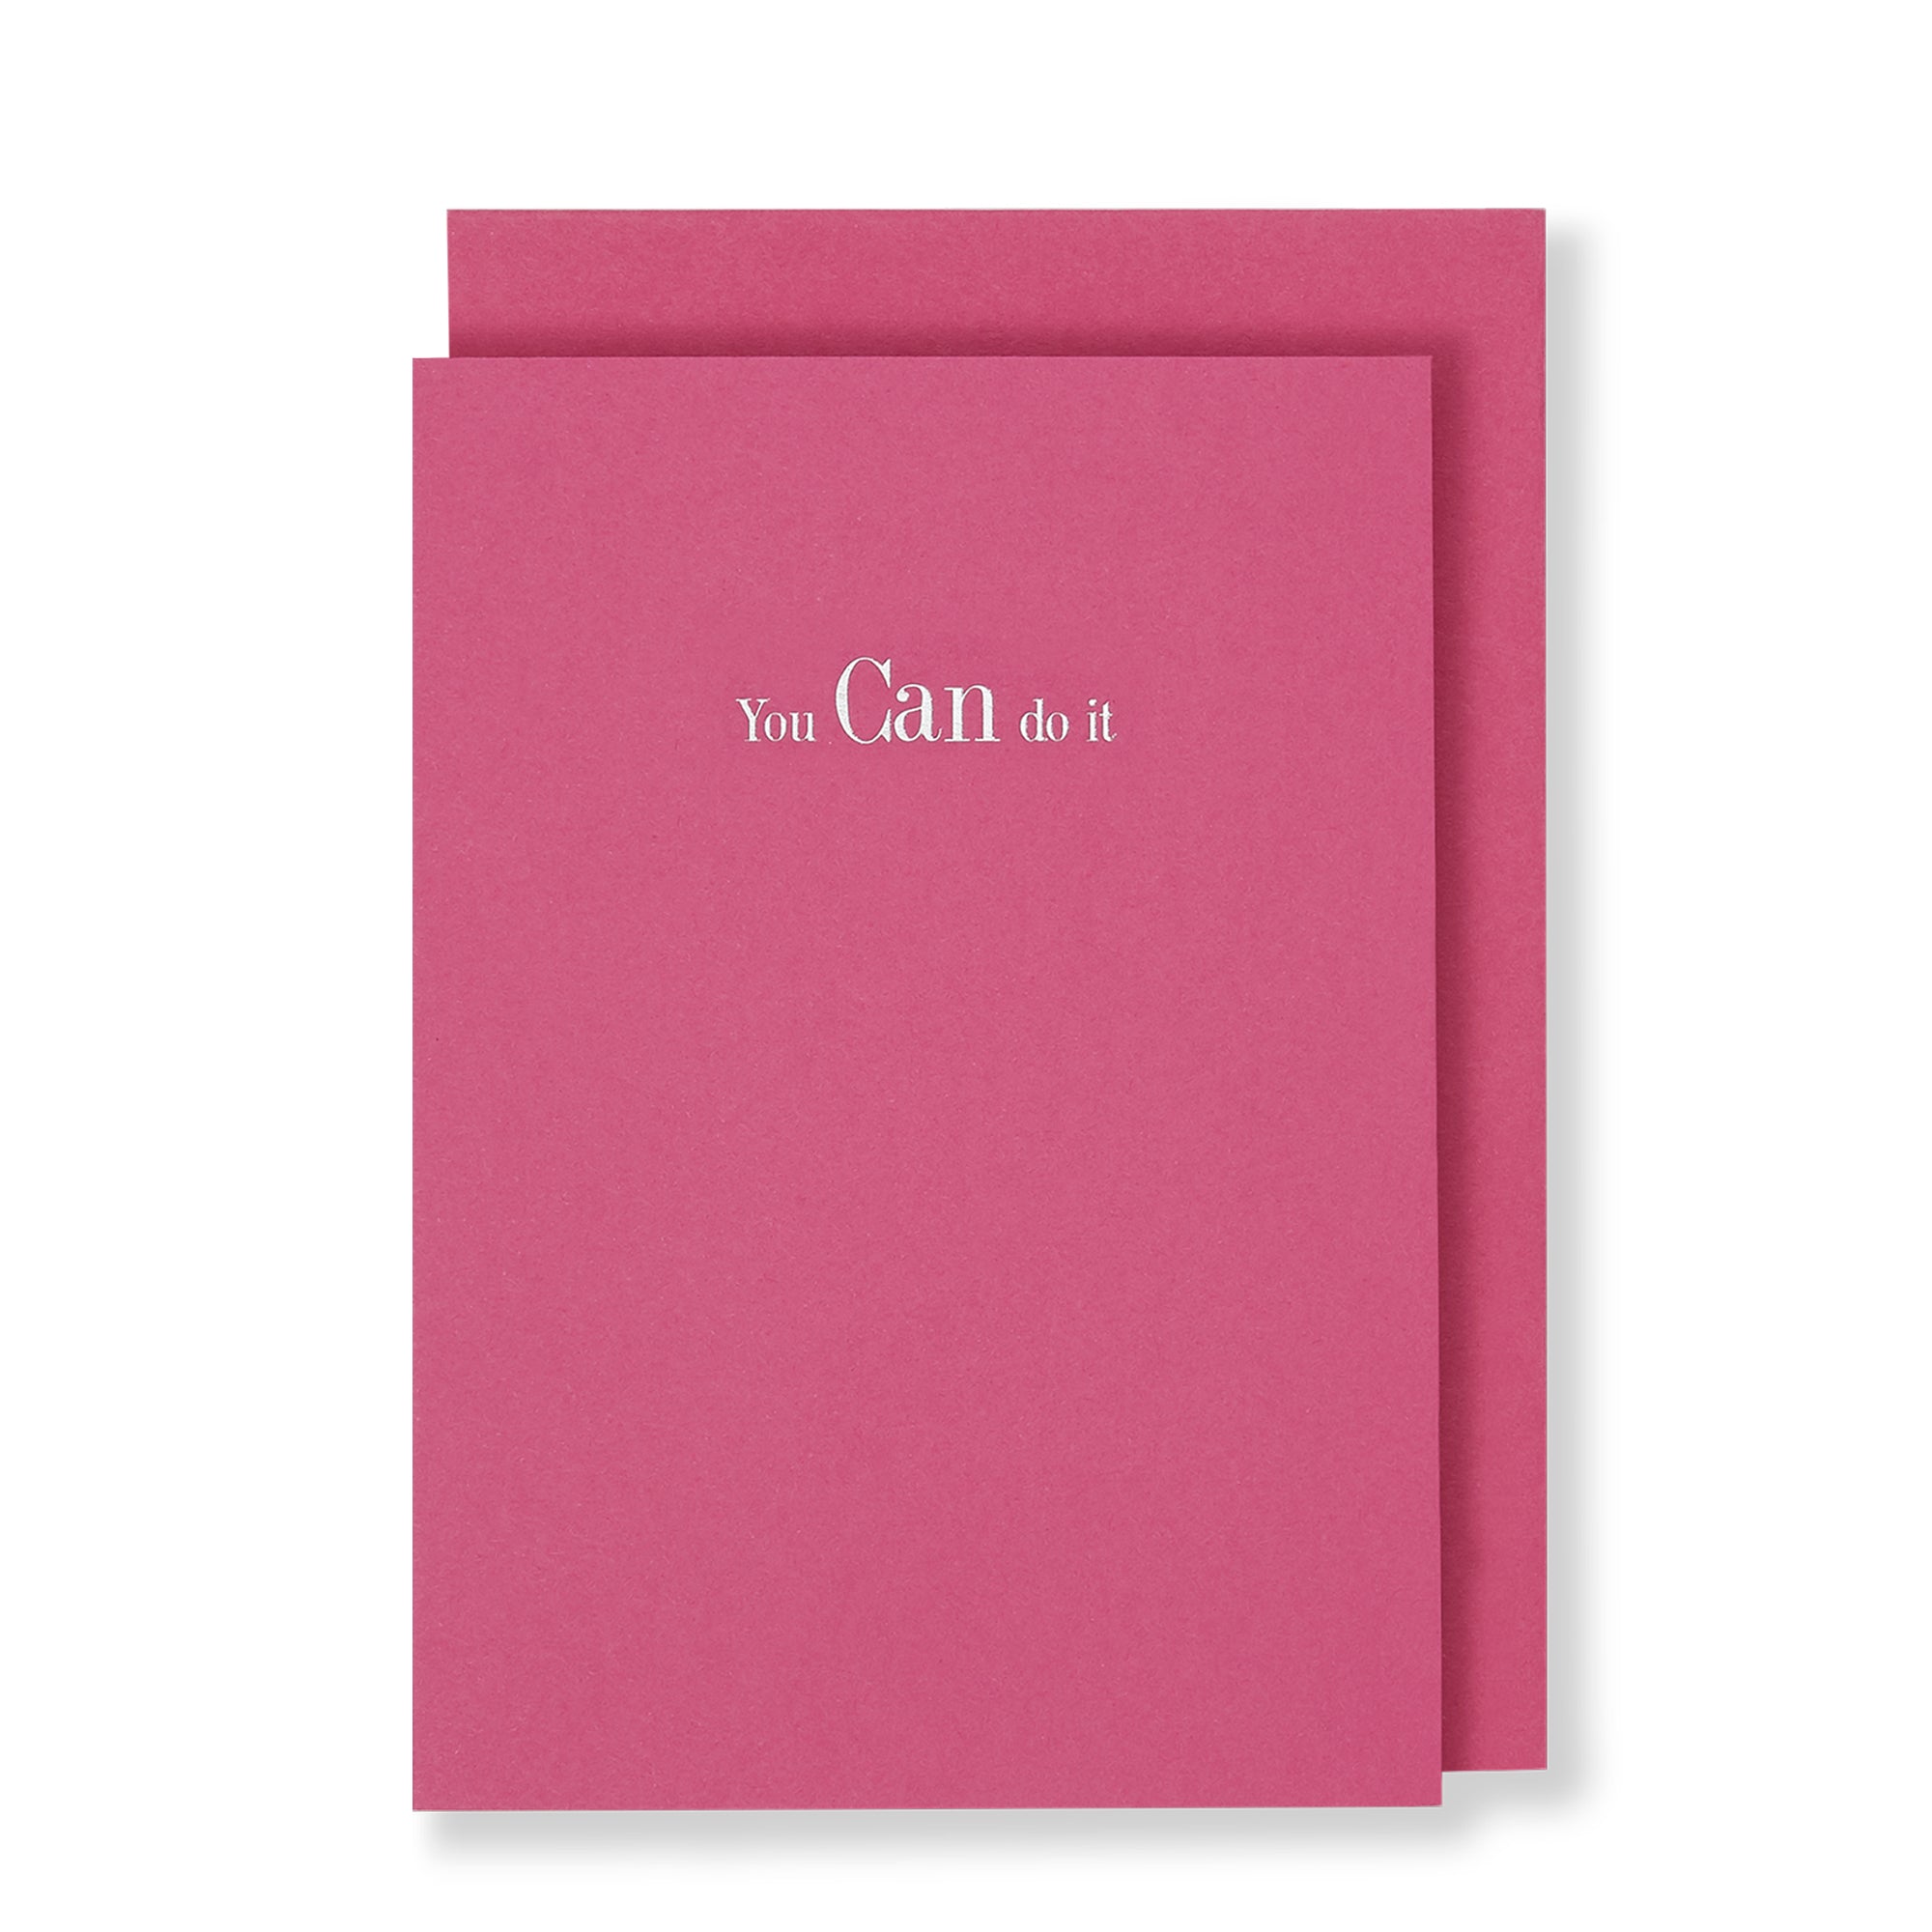 You Can Do It Greeting Card in Ashy Pink, Front